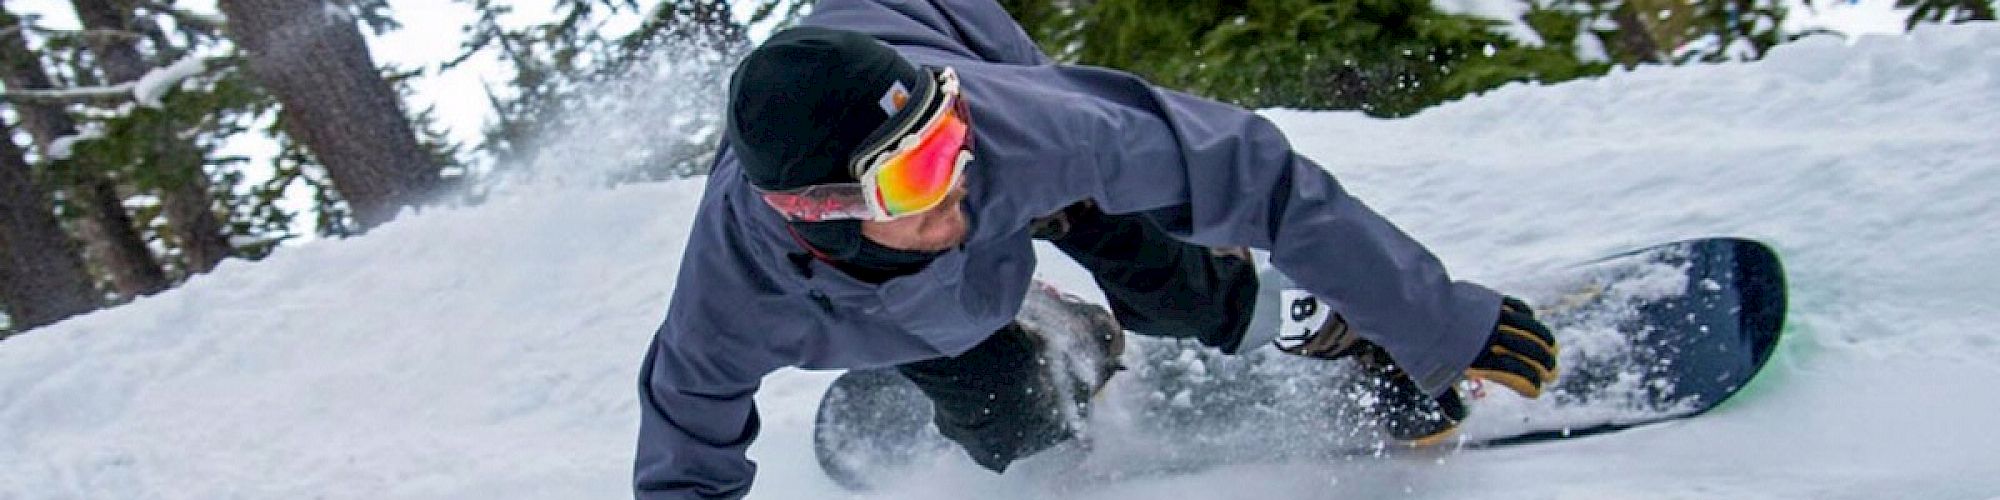 A person is snowboarding down a snowy slope, making a sharp turn, surrounded by trees, and wearing a jacket and goggles.